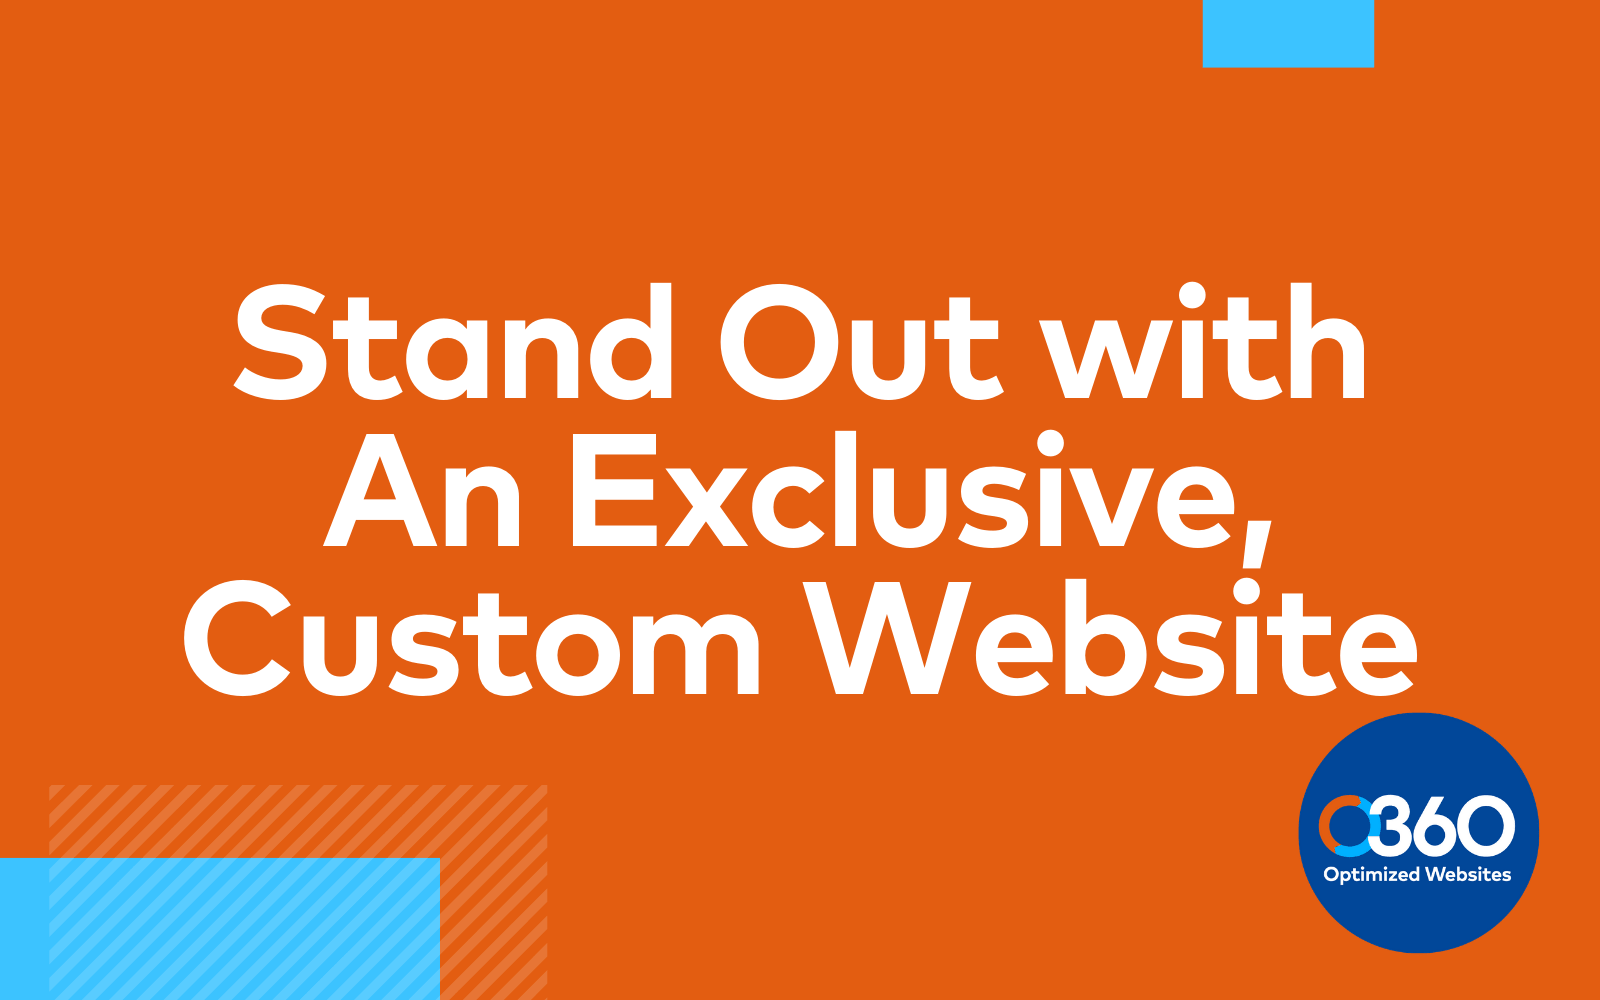 Graphic: Stand out with an exclusive, Custom Website